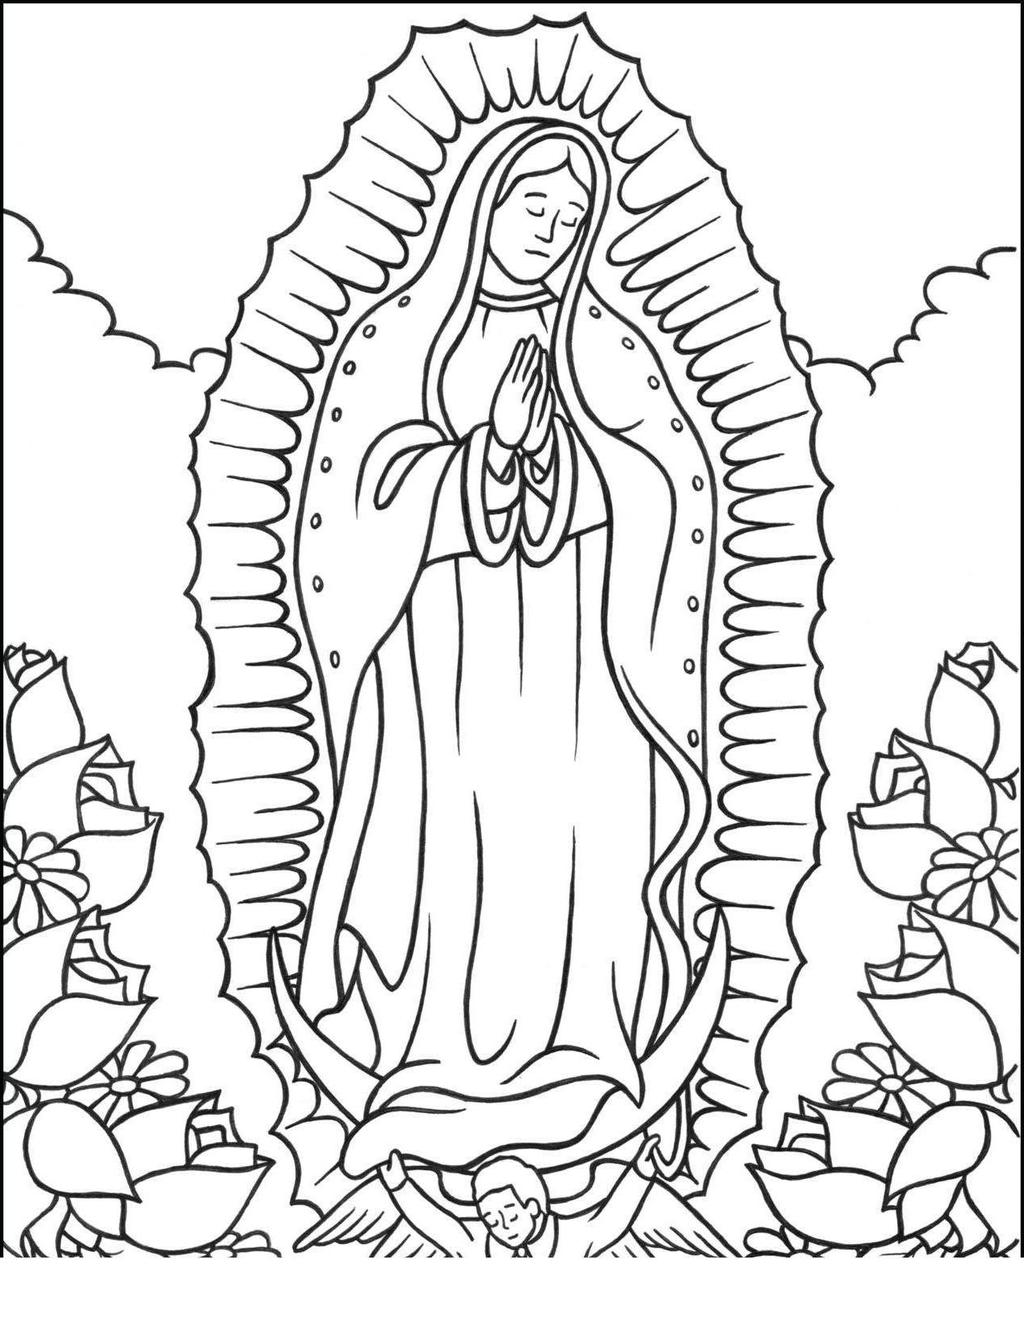 our-lady-of-guadalupe-coloring-page-for-kids-wallpapers-hd-references